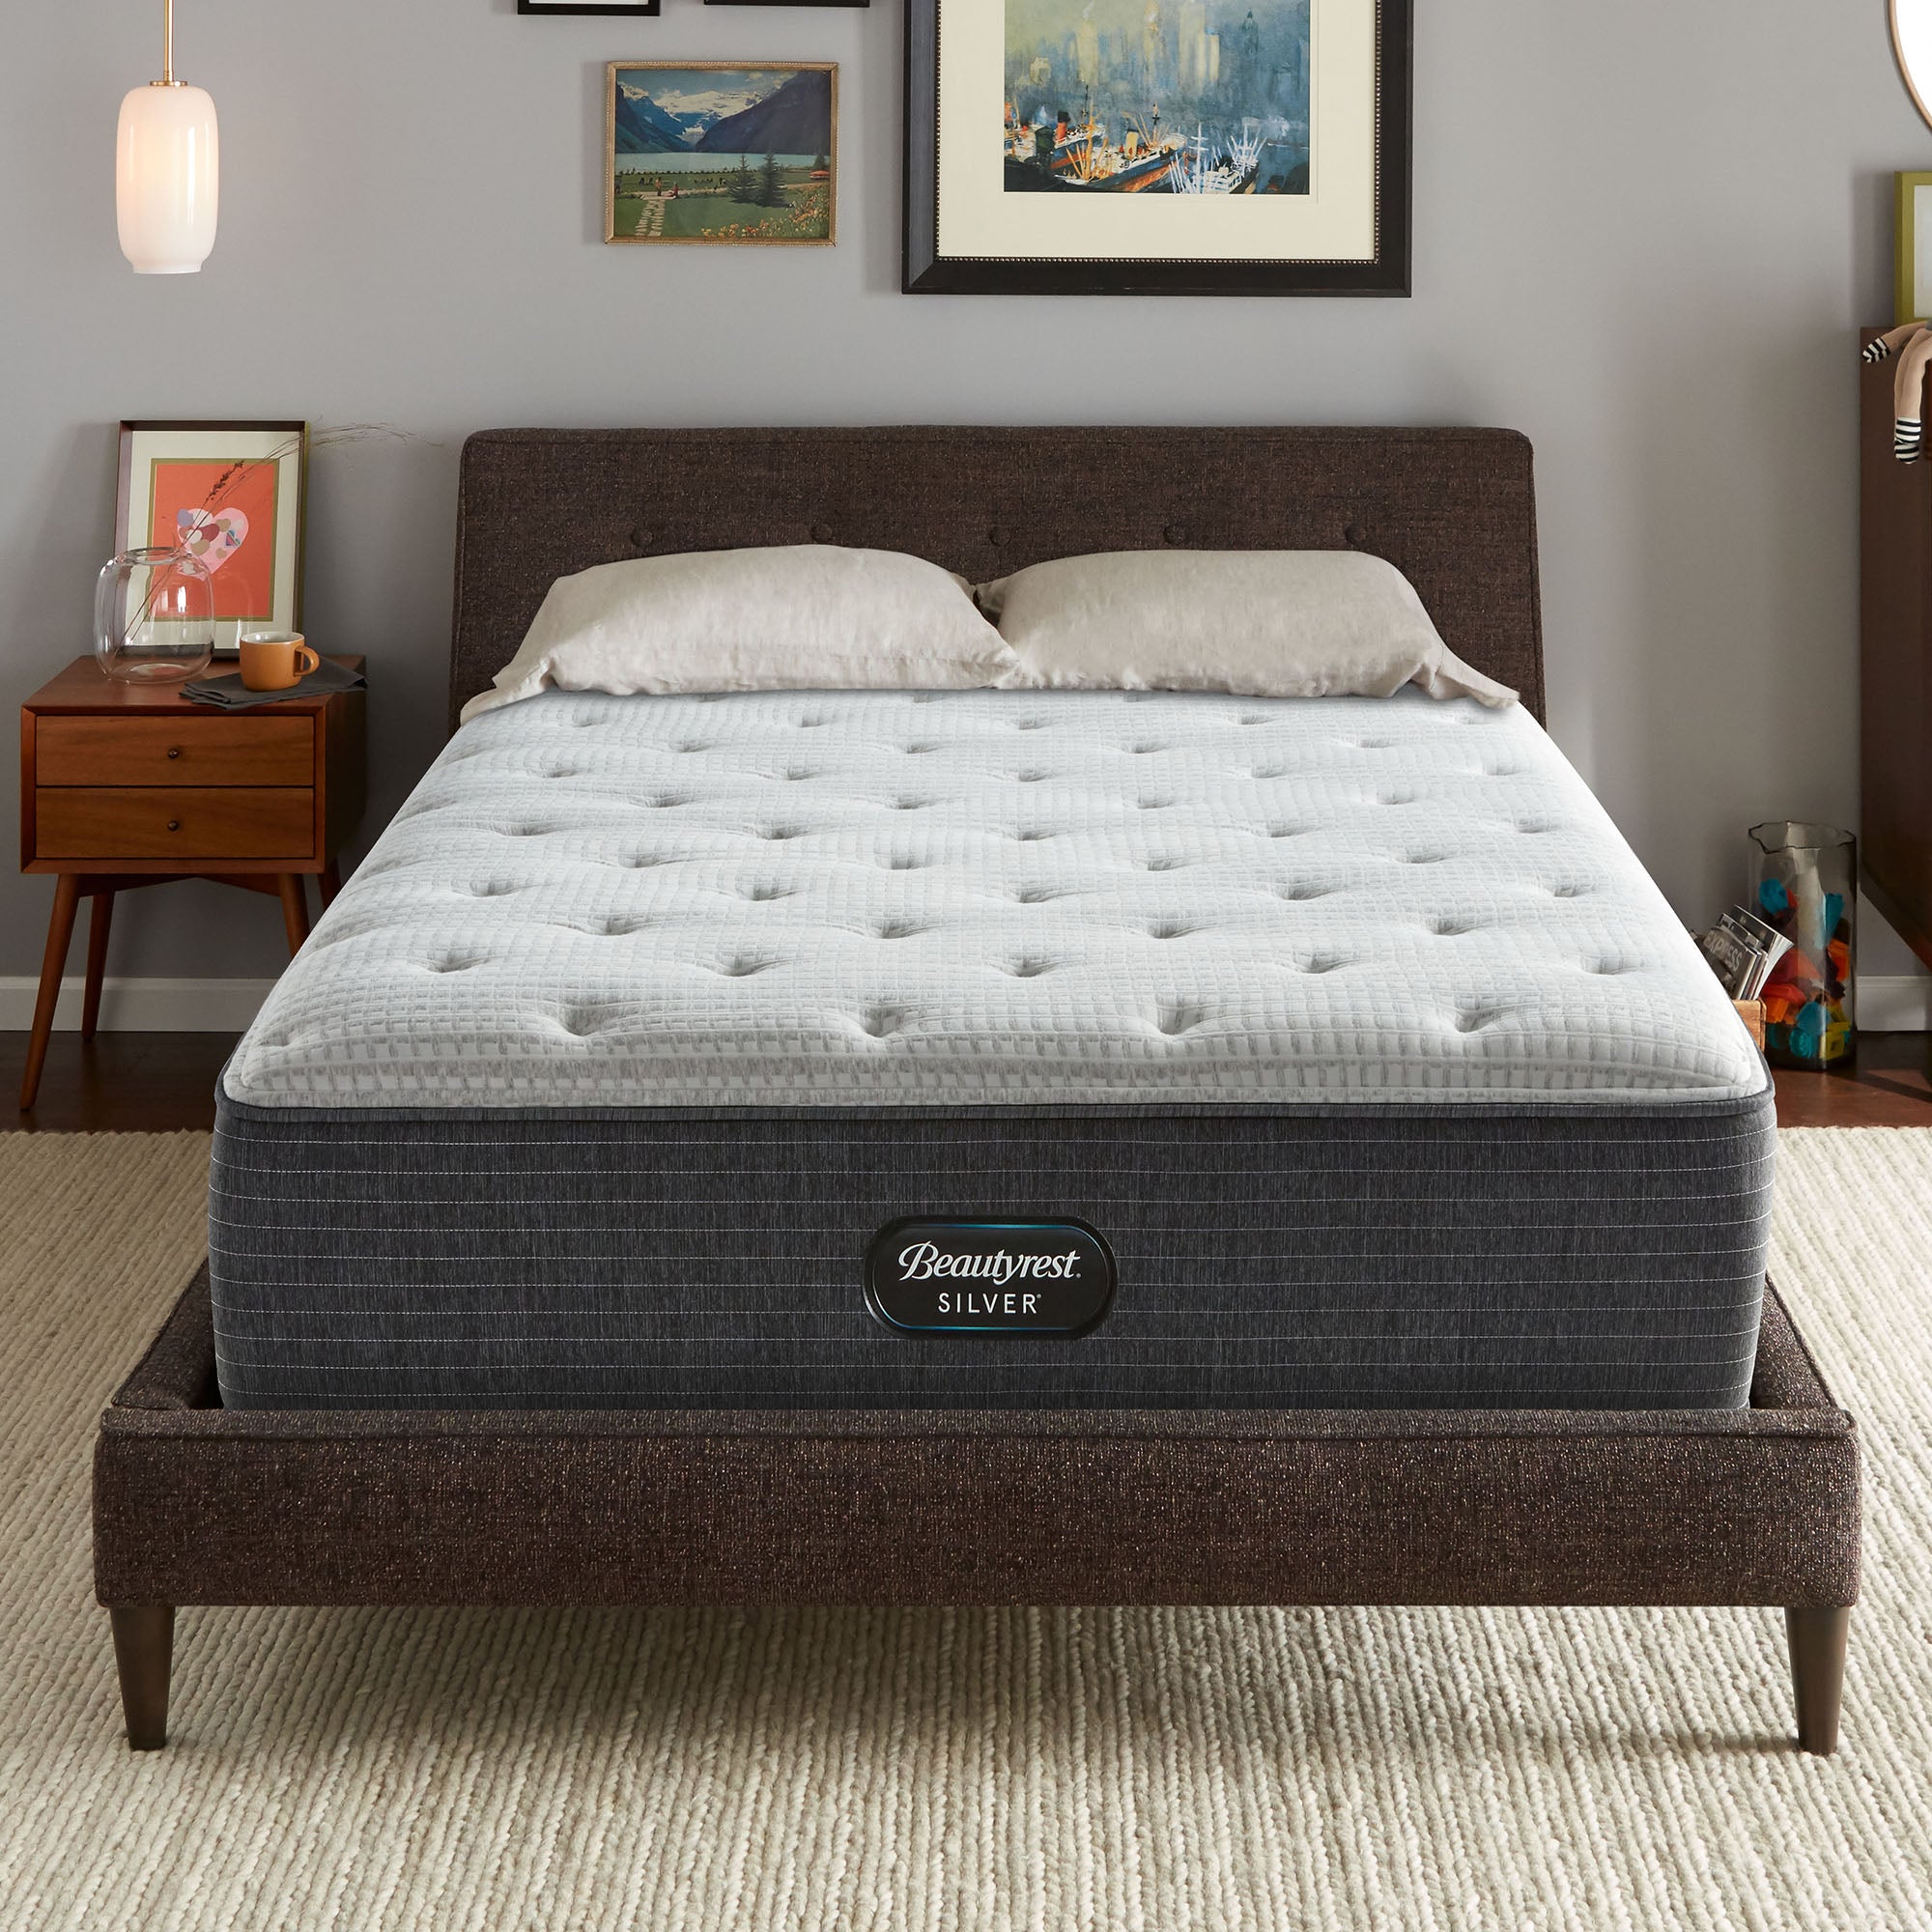 The Beautyrest Silver BRS900-C Medium mattress in a bedroom on a brown bed